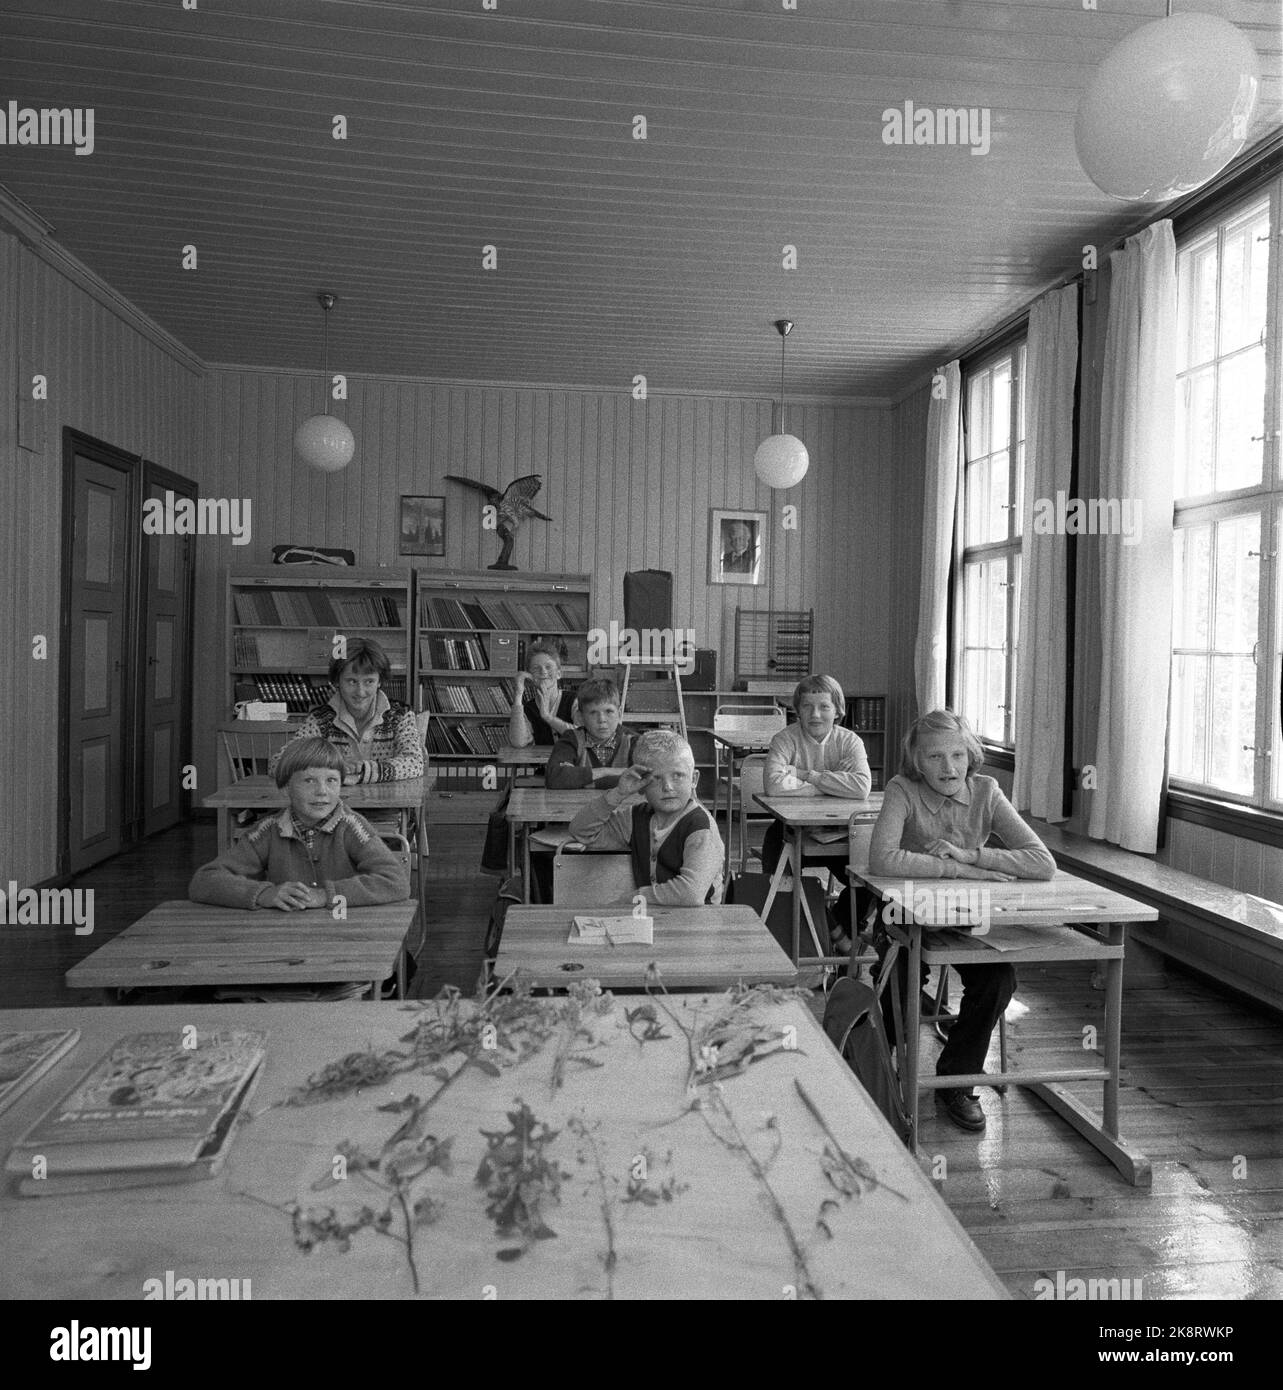 Oslo 1956. Bjørnholt school Seven -year -old Tore on Lake Skjærsjøen sits in the middle of the classroom in front of Bjørnholt school. It has only one classroom and students from 7 - 13 years .. Photo: Sverre A. Børretzen and Aage Storløkken / Current / NTB Stock Photo